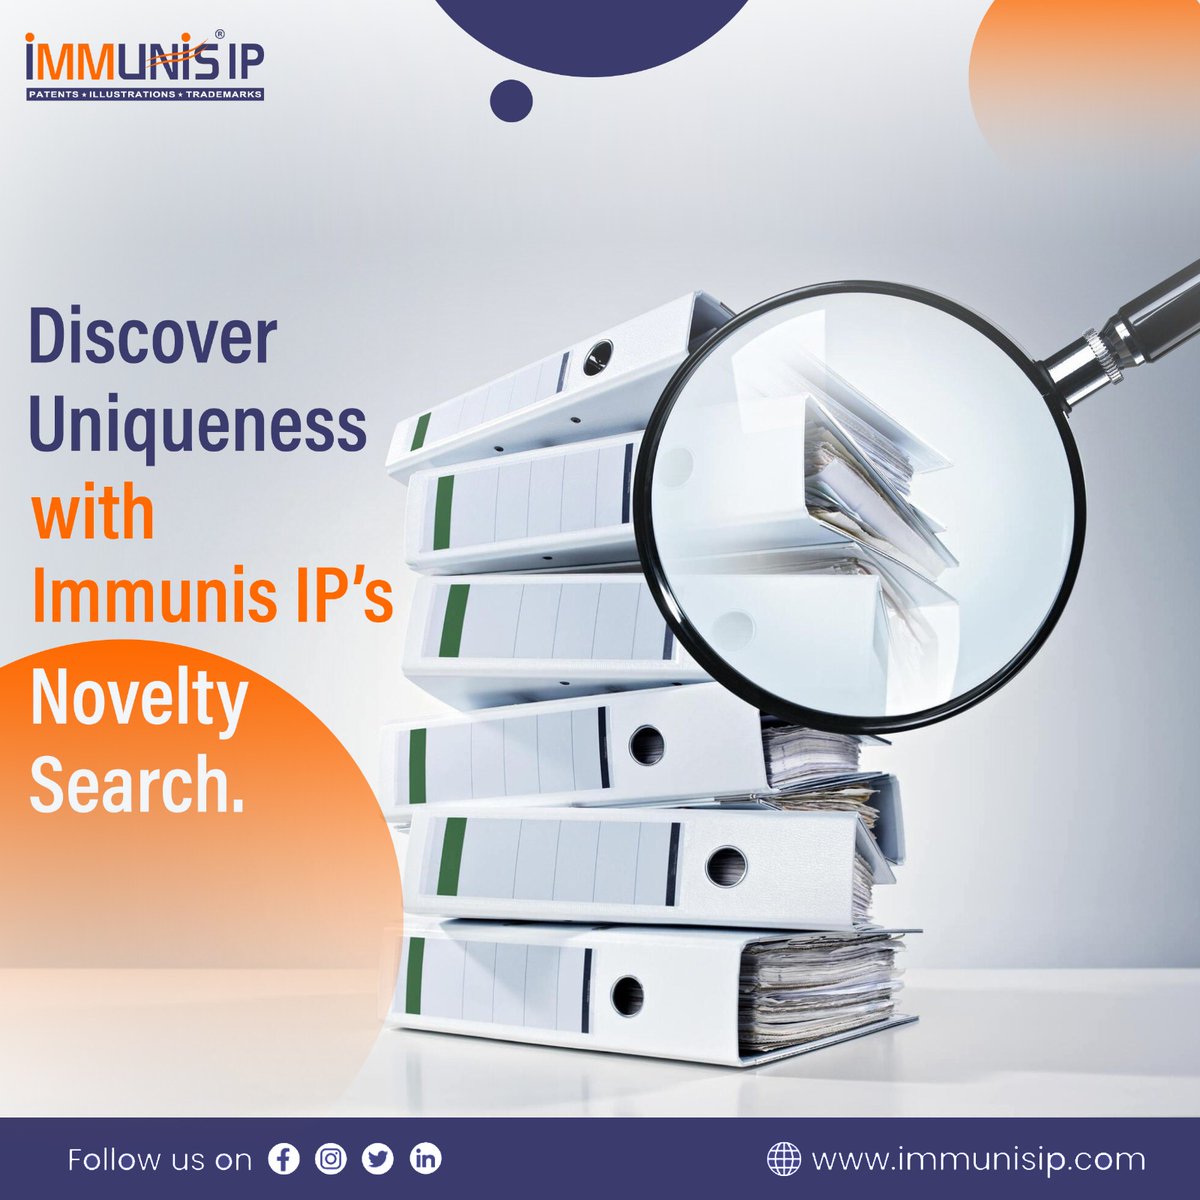 Are you wondering if your idea is unique? Let’s find it out together.

Call us to embark on a journey of discovery with Immunis IP, today-@ +1-678-666-0143, visit us: immunisip.com, mail us:hello@immunisip.com

#NoveltySearch #InnovationUnleashed #ImmunisIP #UniqueIdeas